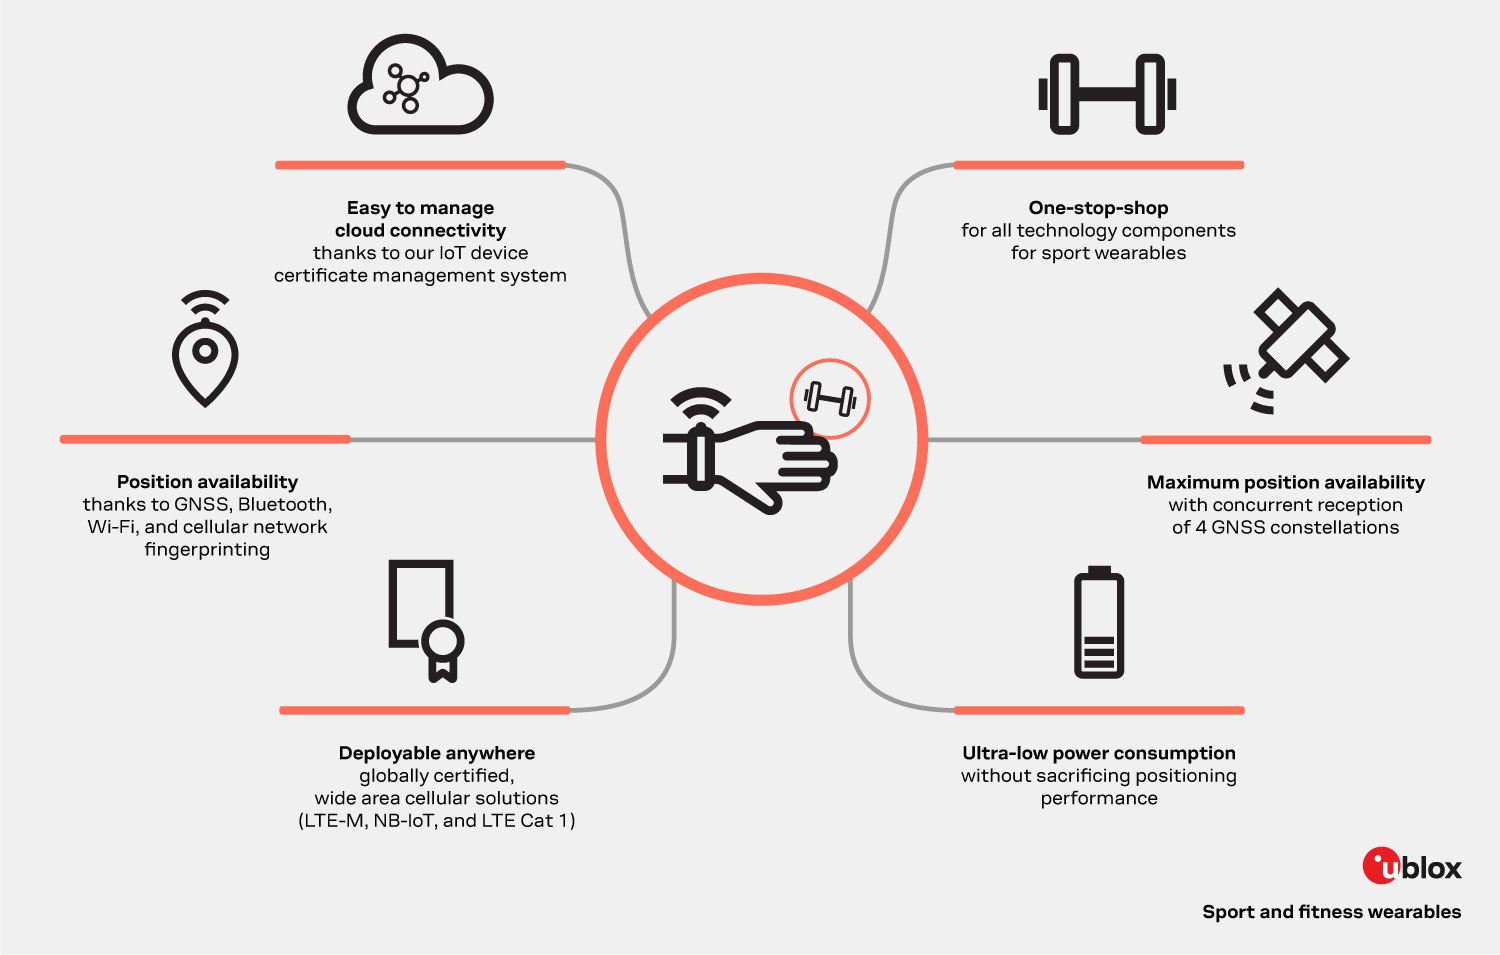 Infographic presenting benefits of u-blox solutions for sport and fitness wearables